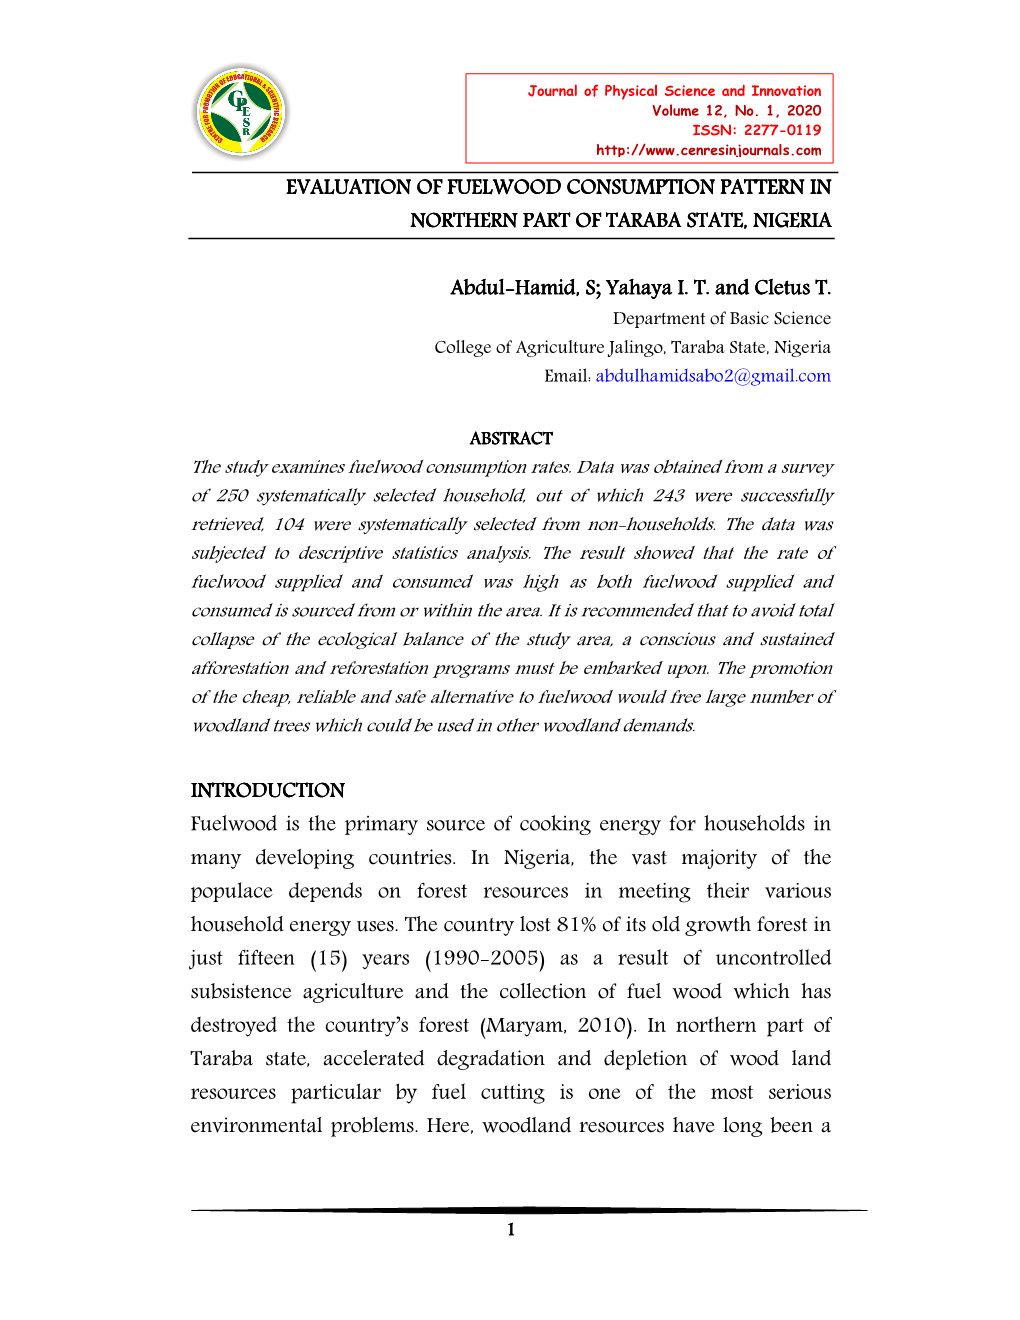 Evaluation of Fuelwood Consumption Pattern in Northern Part of Taraba State, Nigeria